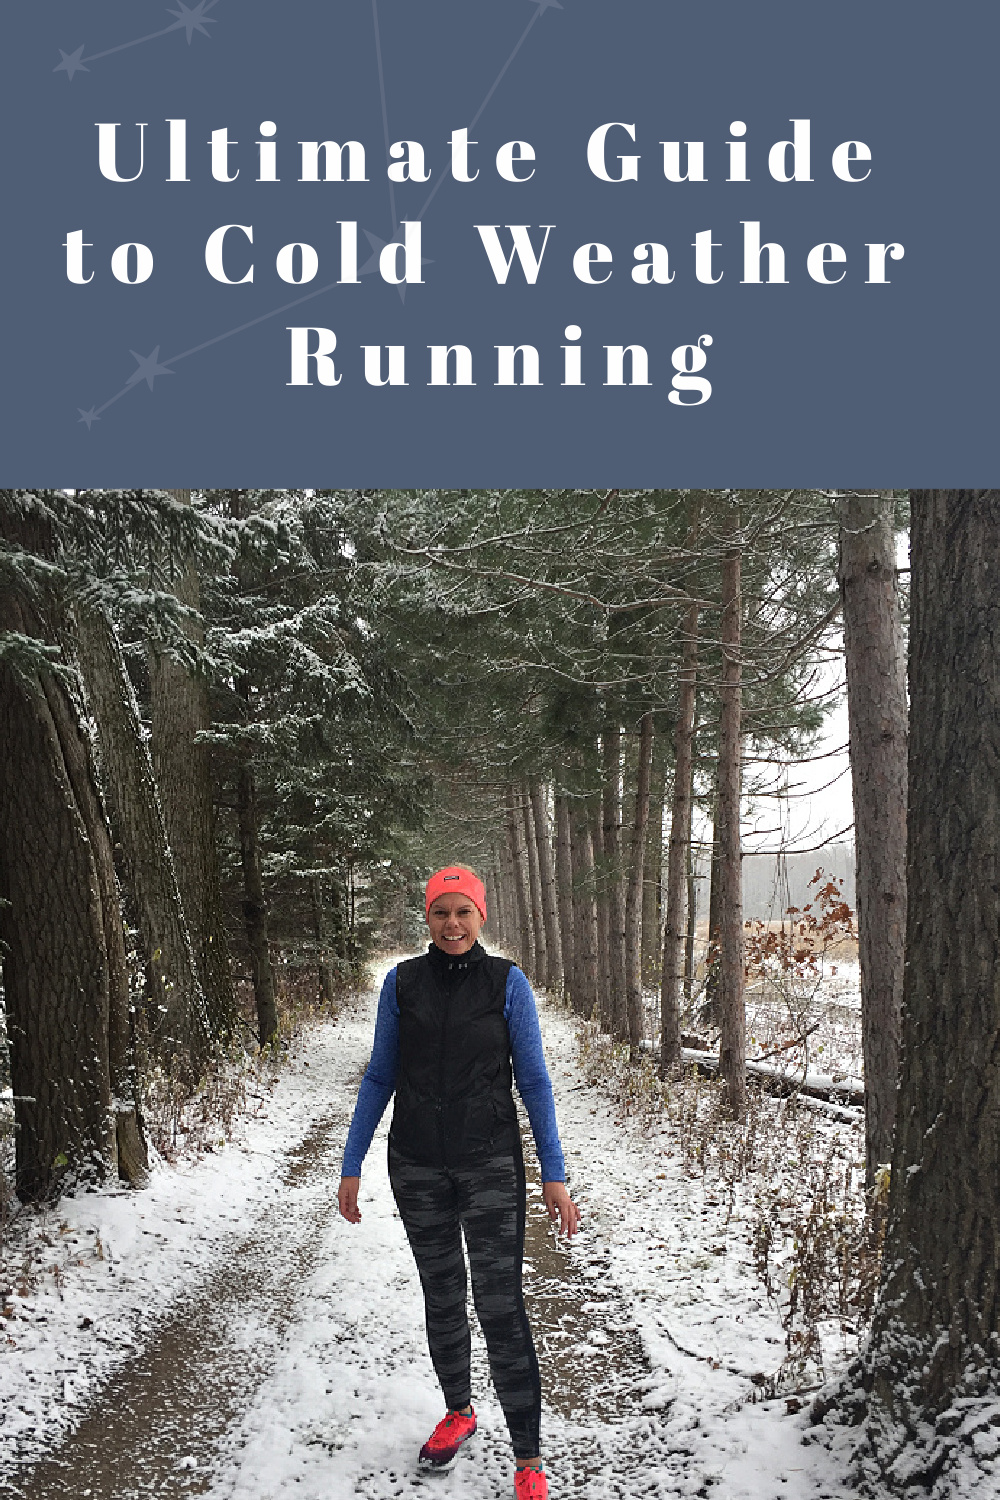 Ultimate Guide to Cold Weather Running